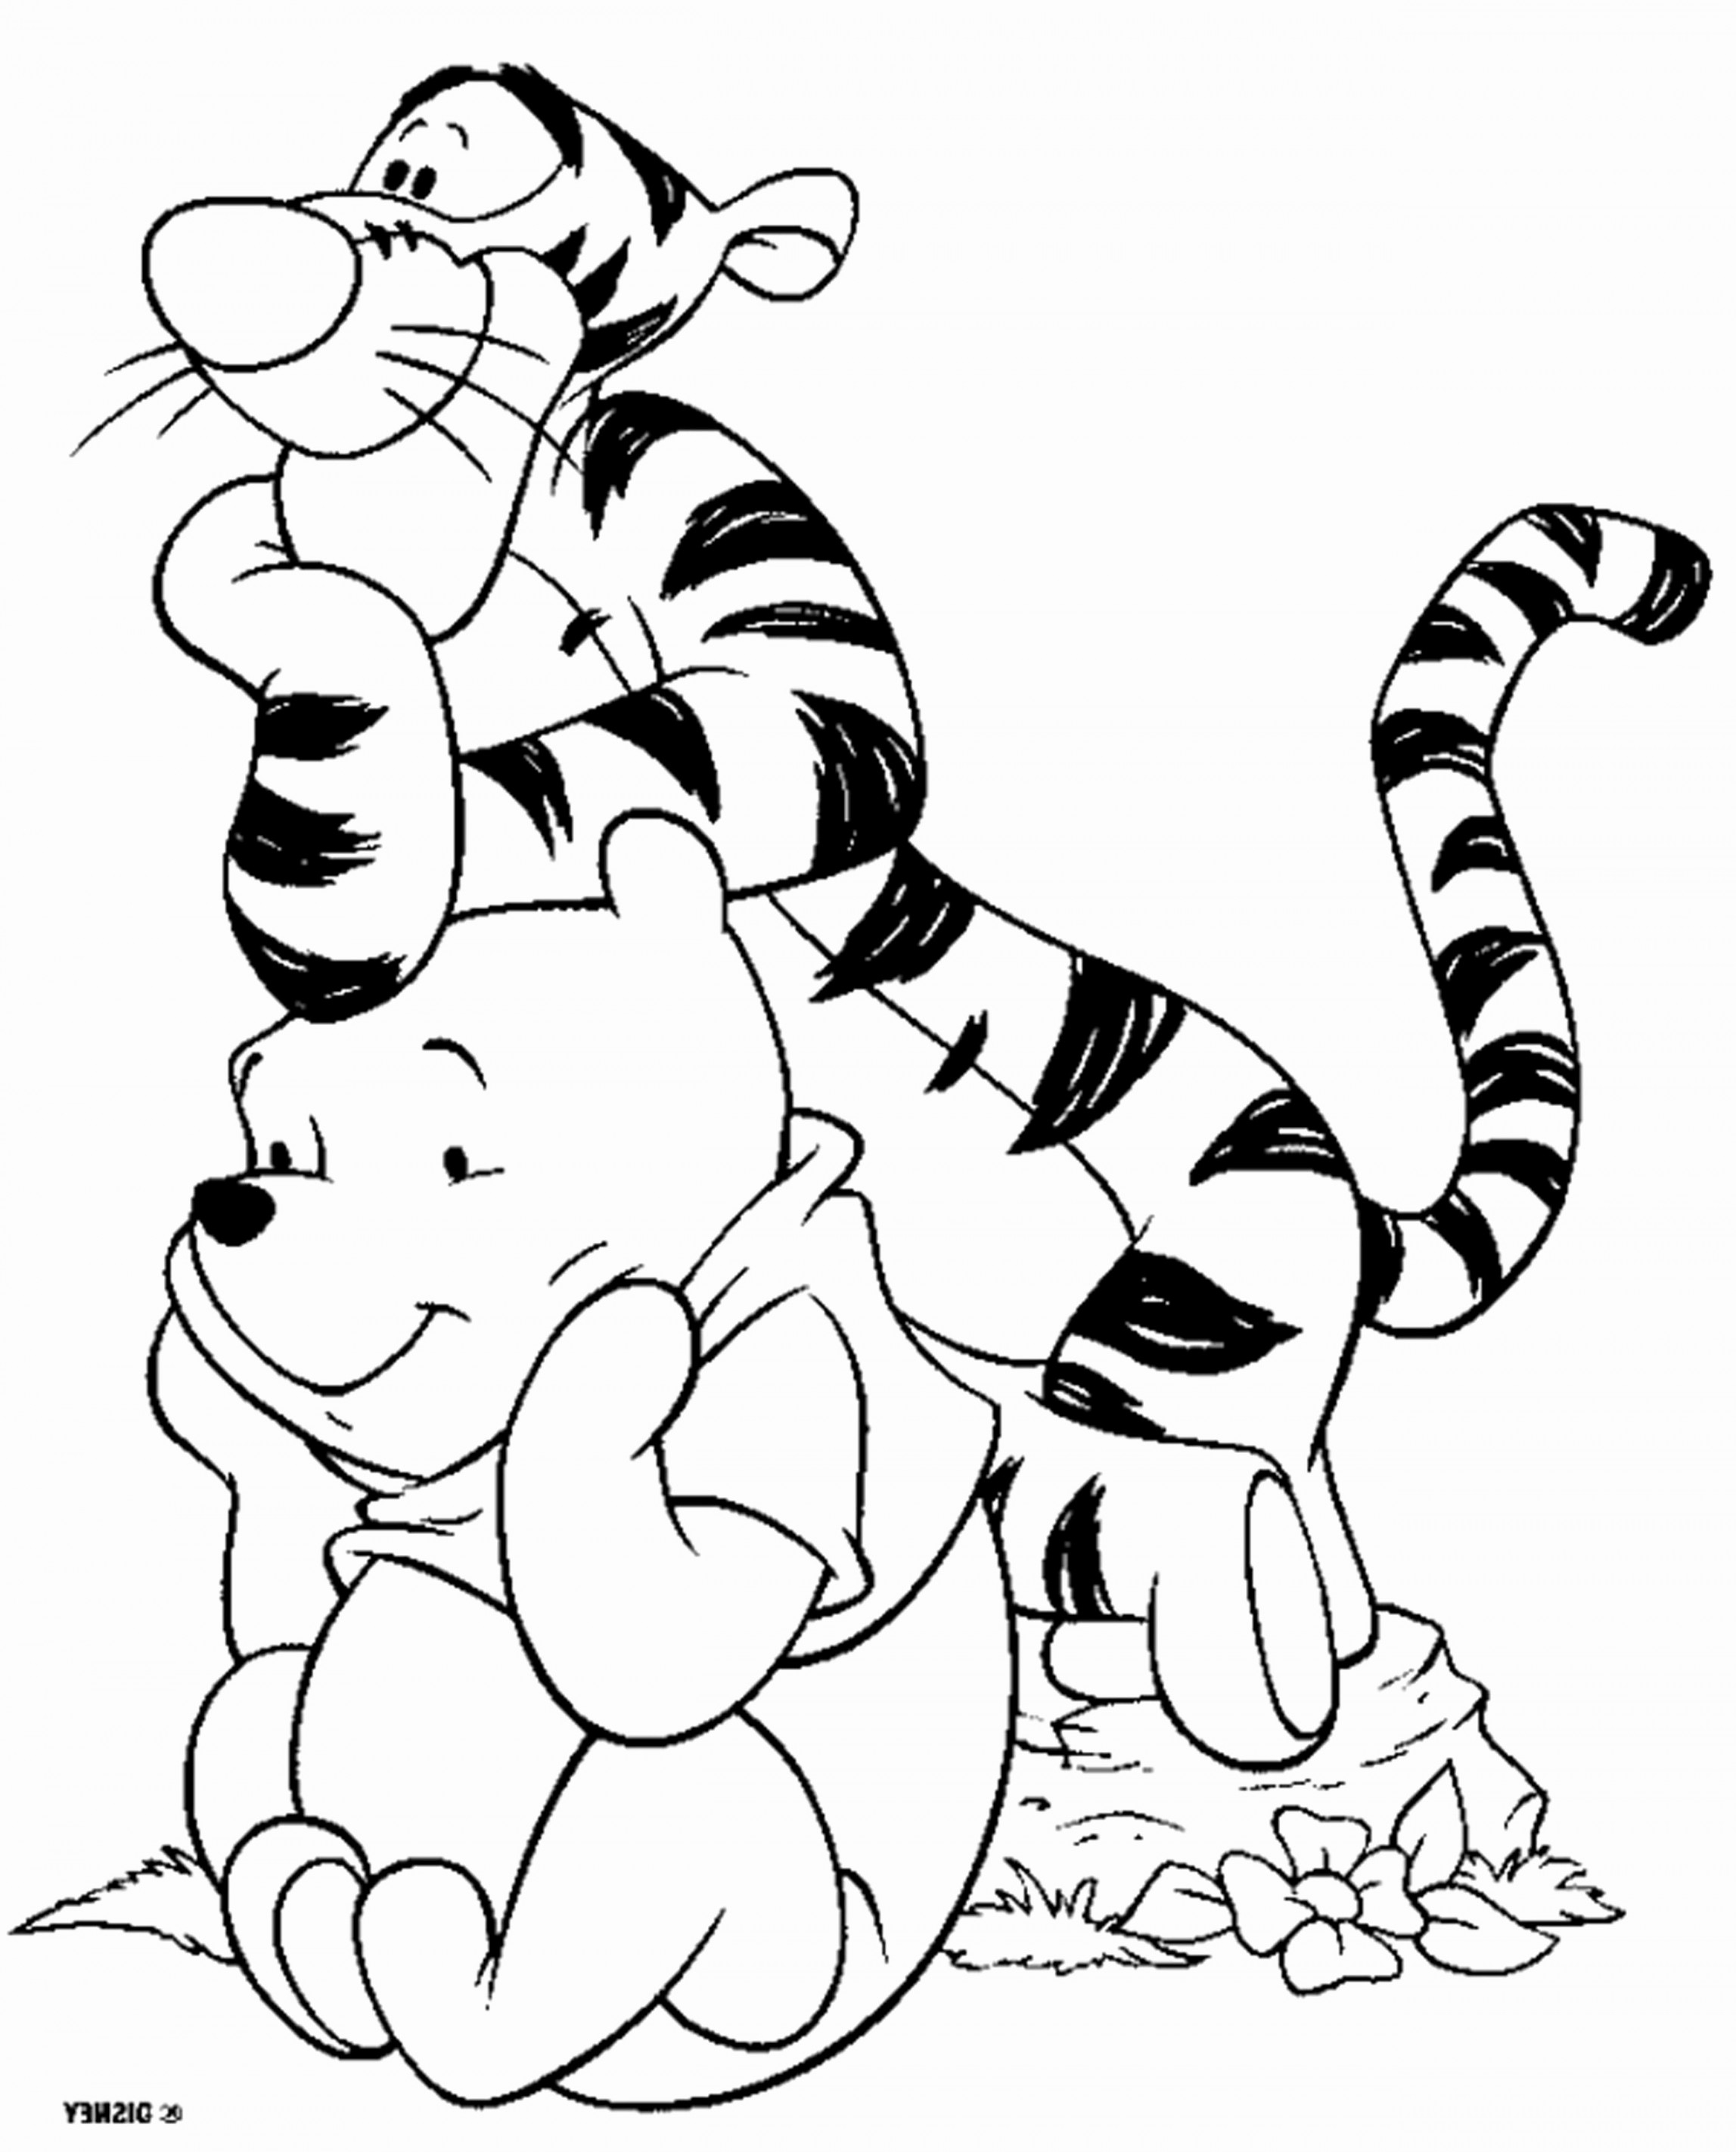 Coloring Pages For Kids To Print Out Coloring Princess Disney Coloring Pages Sheets Free Printable For